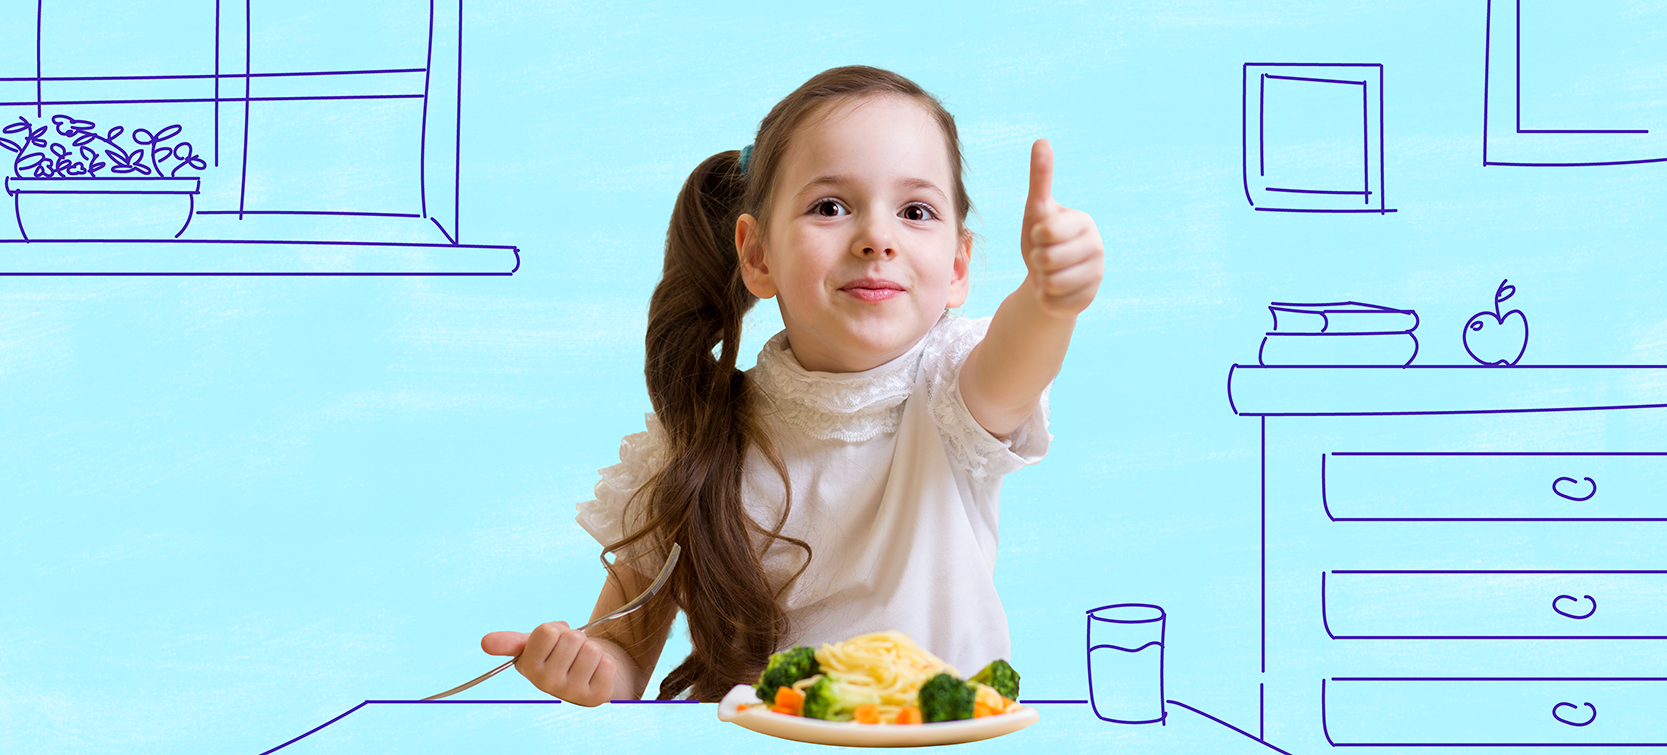 THE IMPORTANCE OF EDUCATING CHILDREN ABOUT HEALTHY FOODS